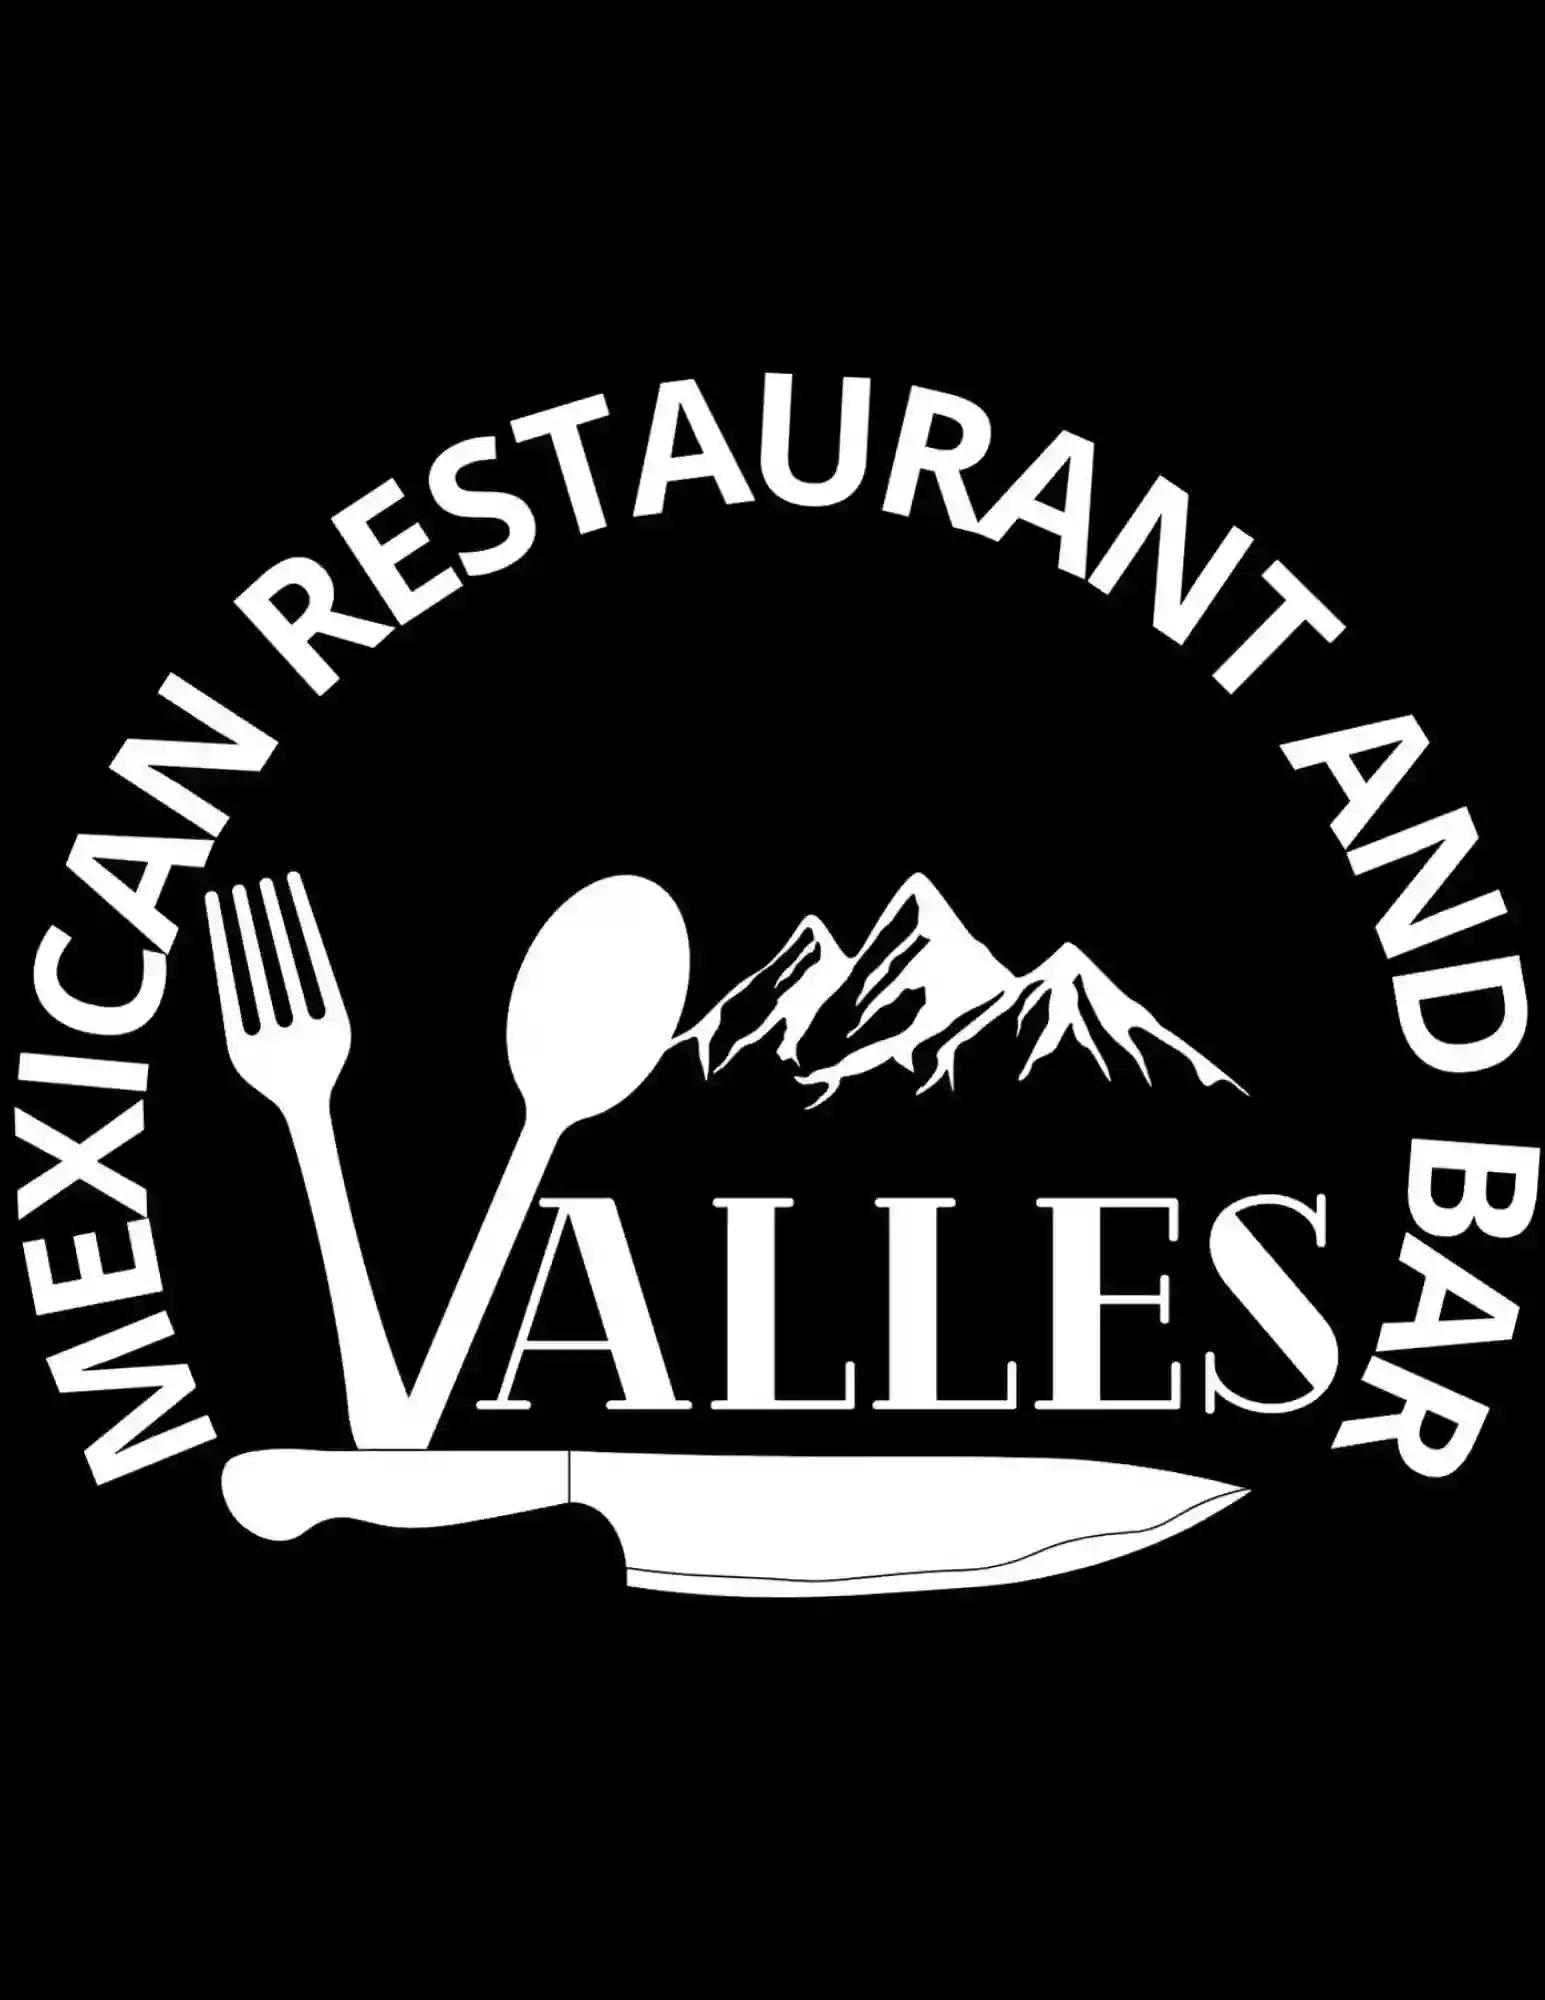 Valles Mexican Restaurant and Bar